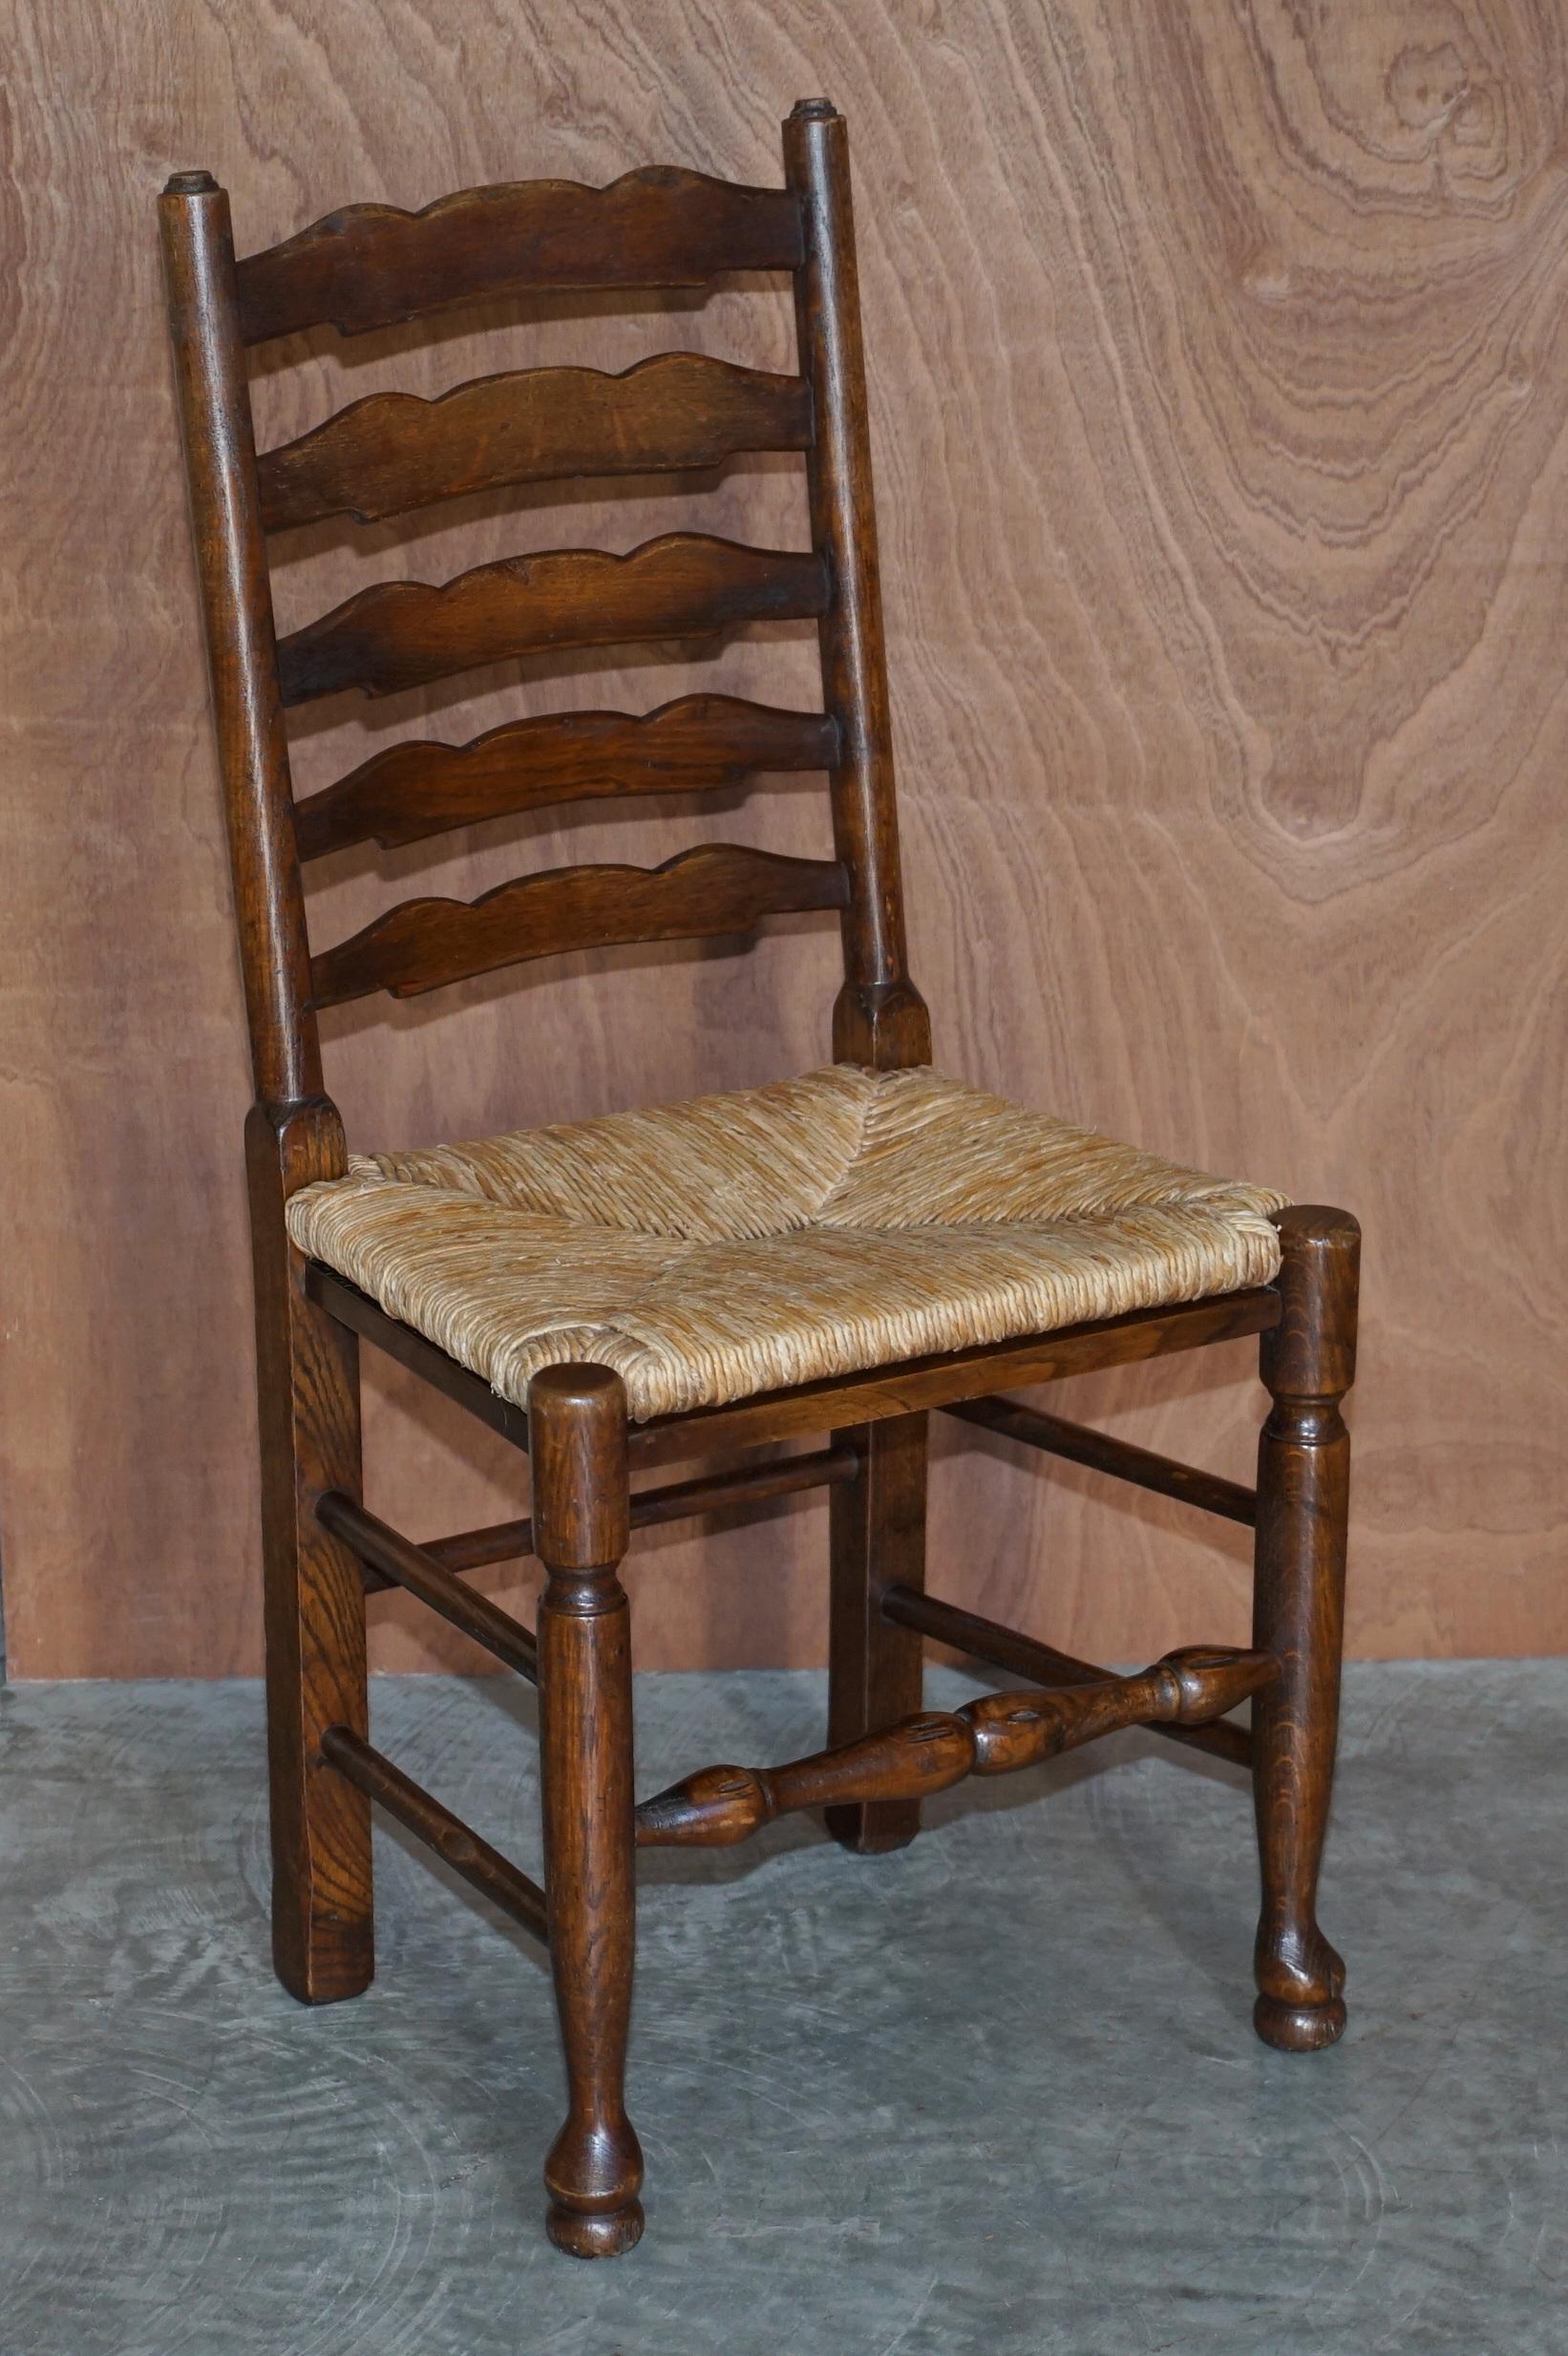 We are delighted to offer this lovely suite of six original Dutch circa 1900-1920 Ladder back rush seat dining chairs.

A very good looking and well-made suite, the timber is all solid elm, the seats the original rush woven straw, these are